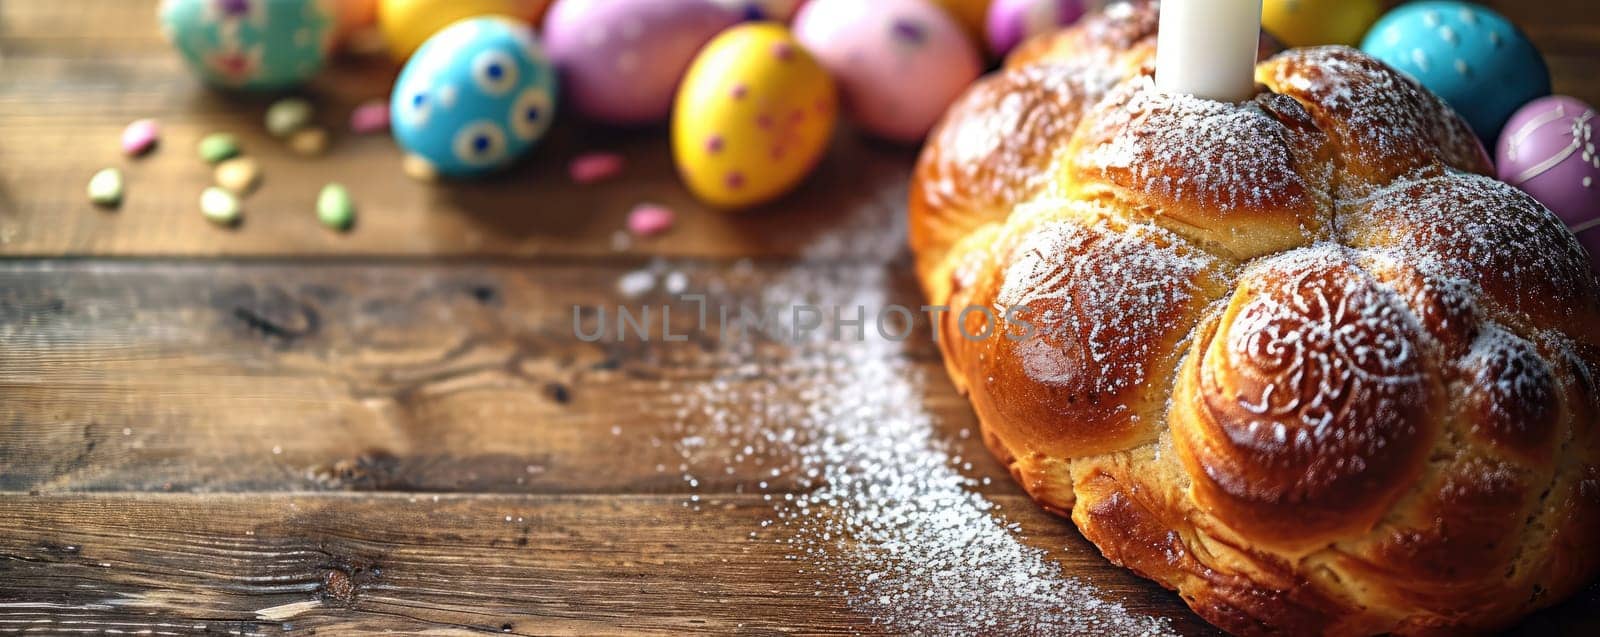 Easter cake and eggs on wooden background by Yurich32